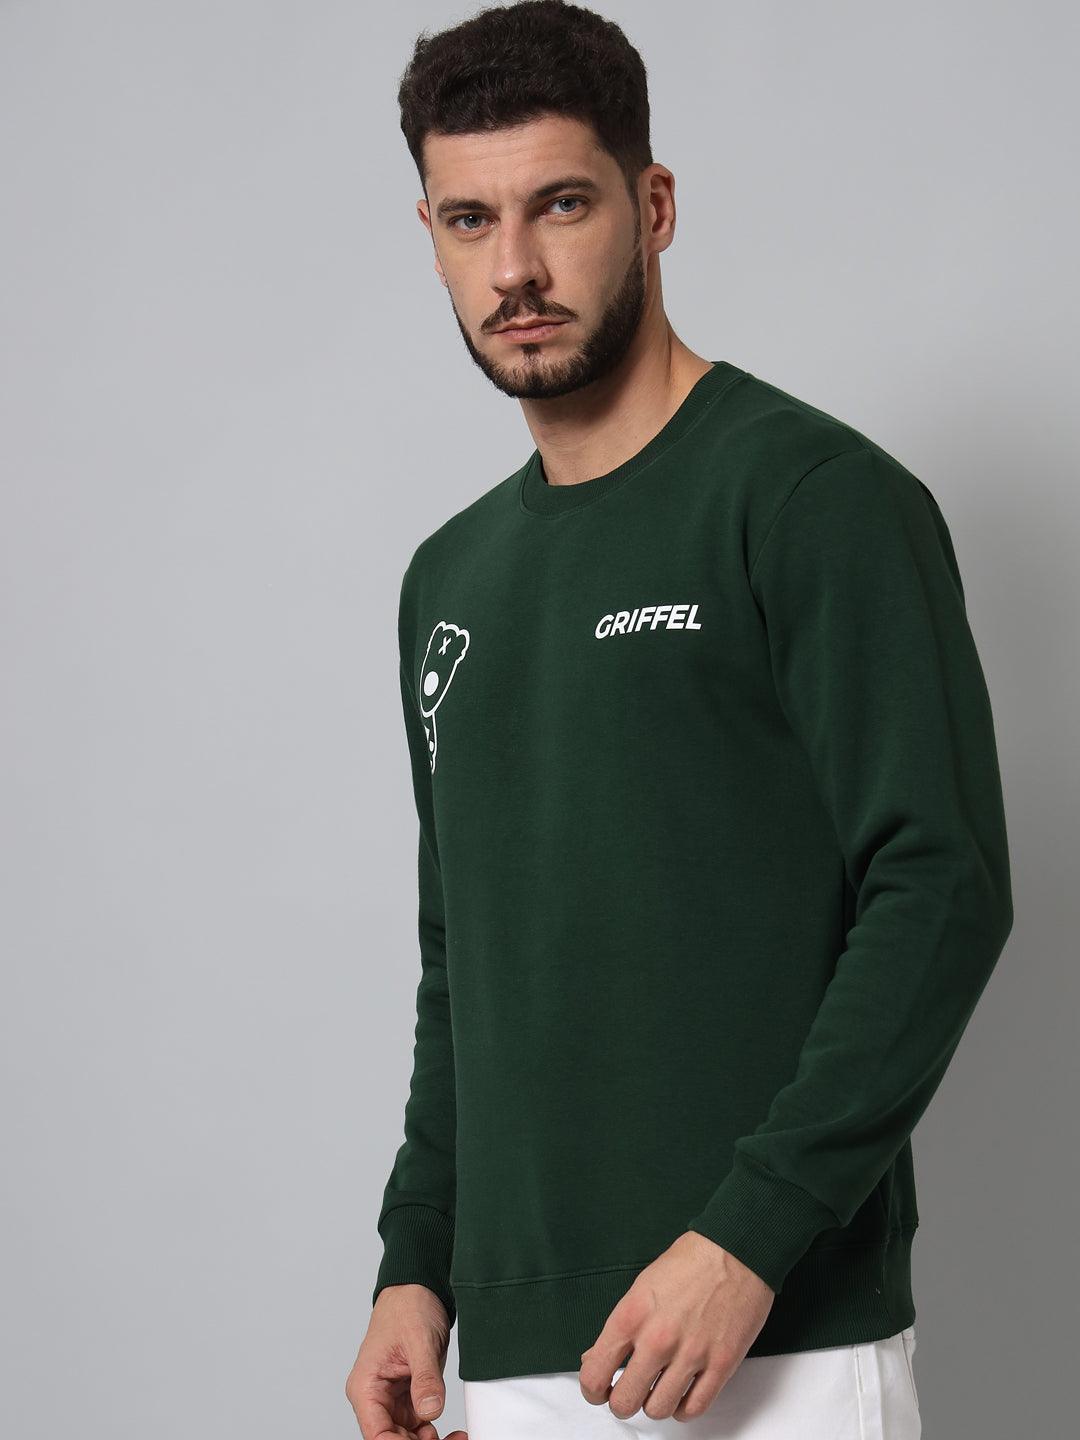 Griffel Men's Cotton Fleece Round Neck Printed Green Sweatshirt with Full Sleeve and Front Logo Print - griffel